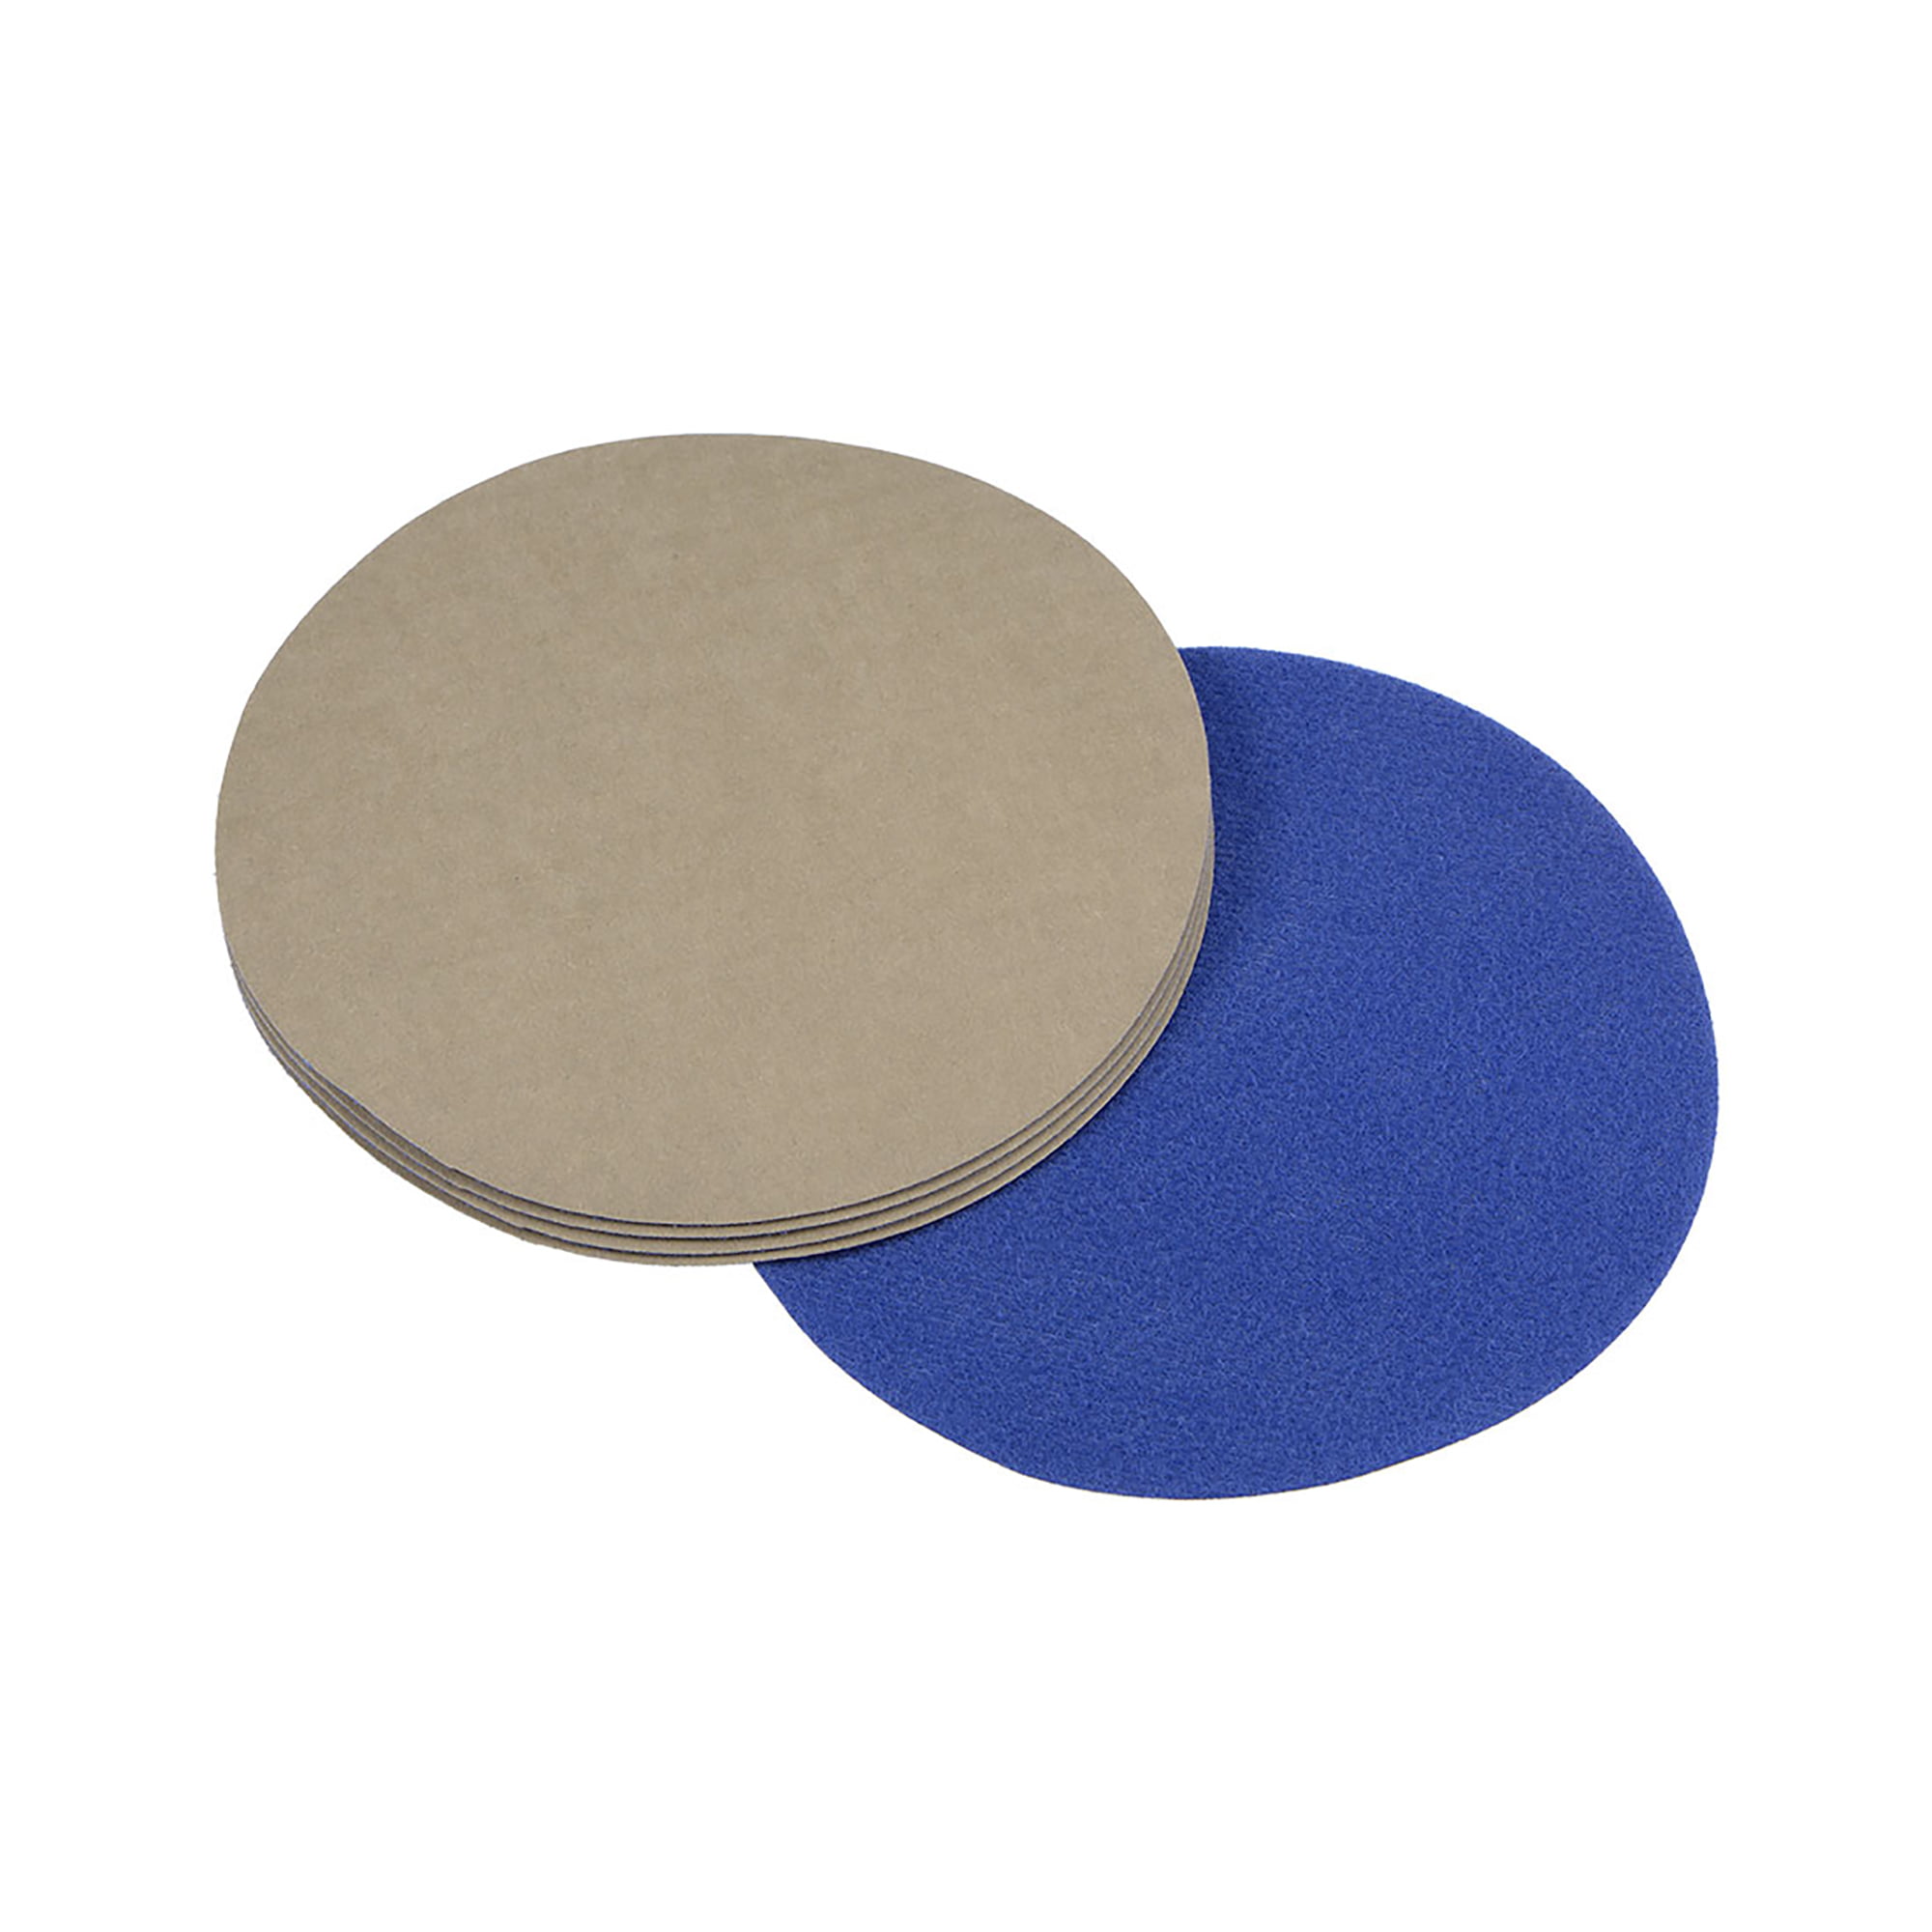 60PCS 60 to 7000 Grit LotFancy 6 Inch Wet Dry Sanding Disc for Automotive Metal Sanding Polishing Orbital Sander Paper Wood Finishing Silicon Carbide Hook and Loop Sandpaper 